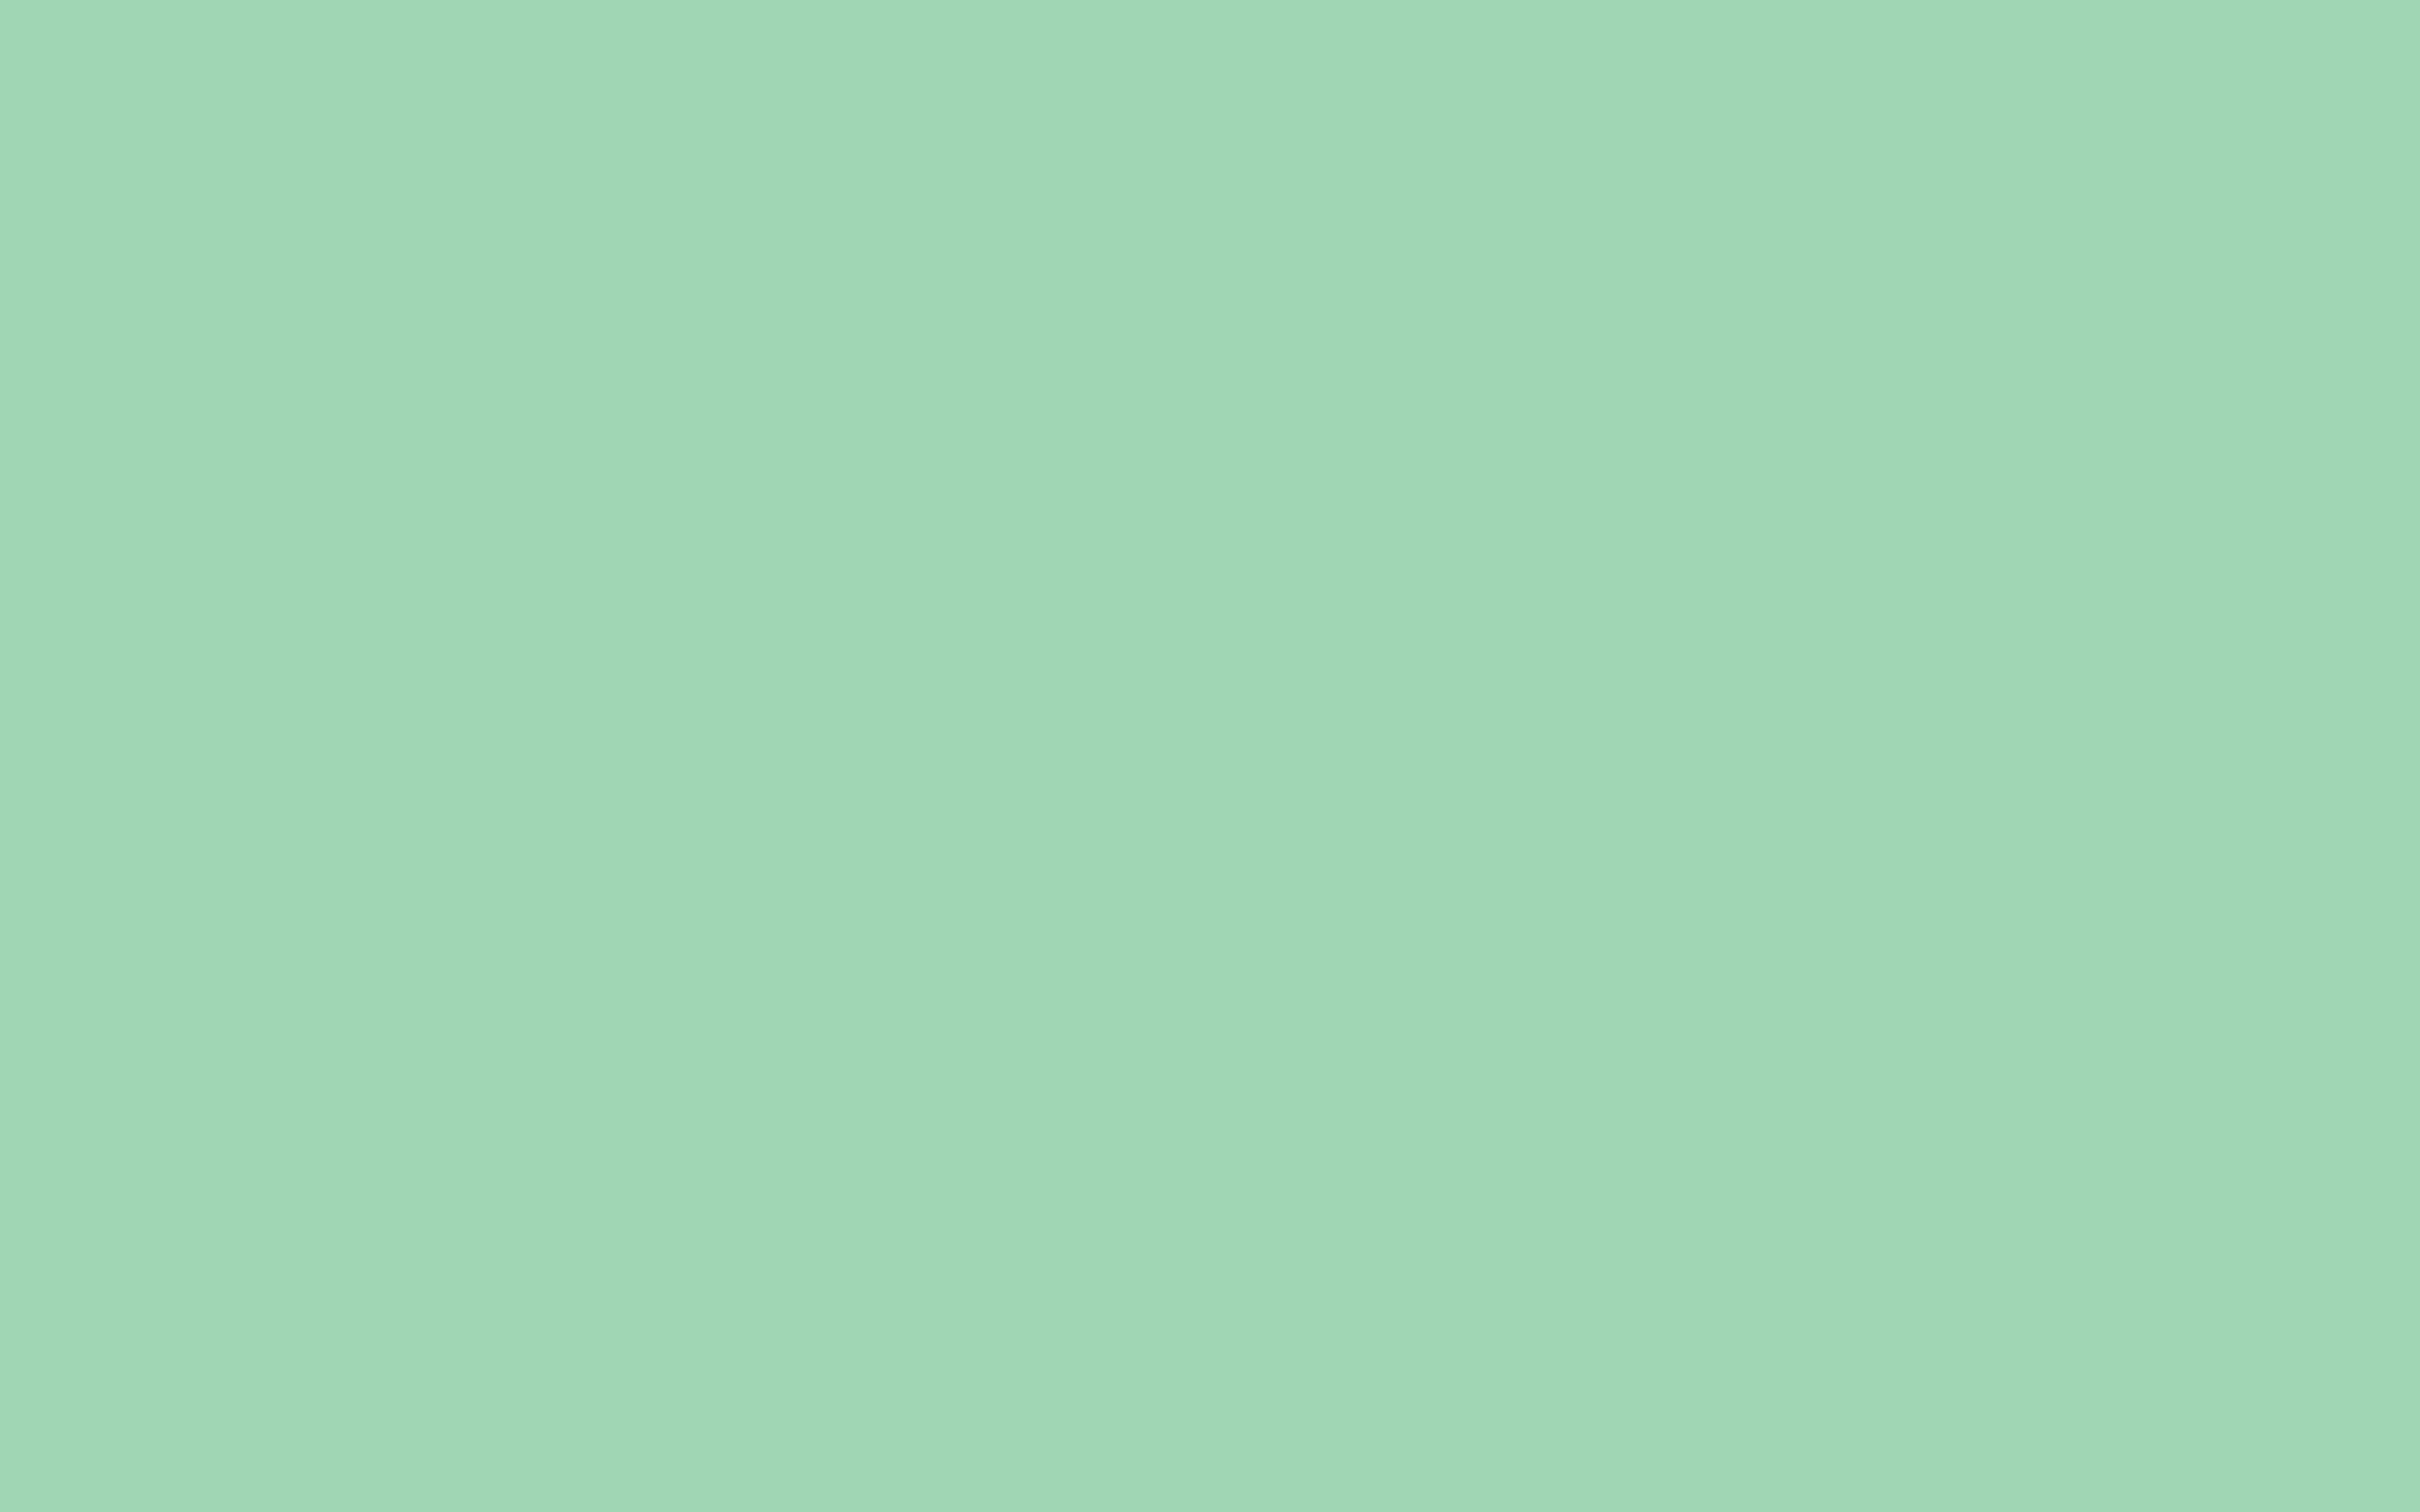 2560x1600 Turquoise Green Solid Color Background